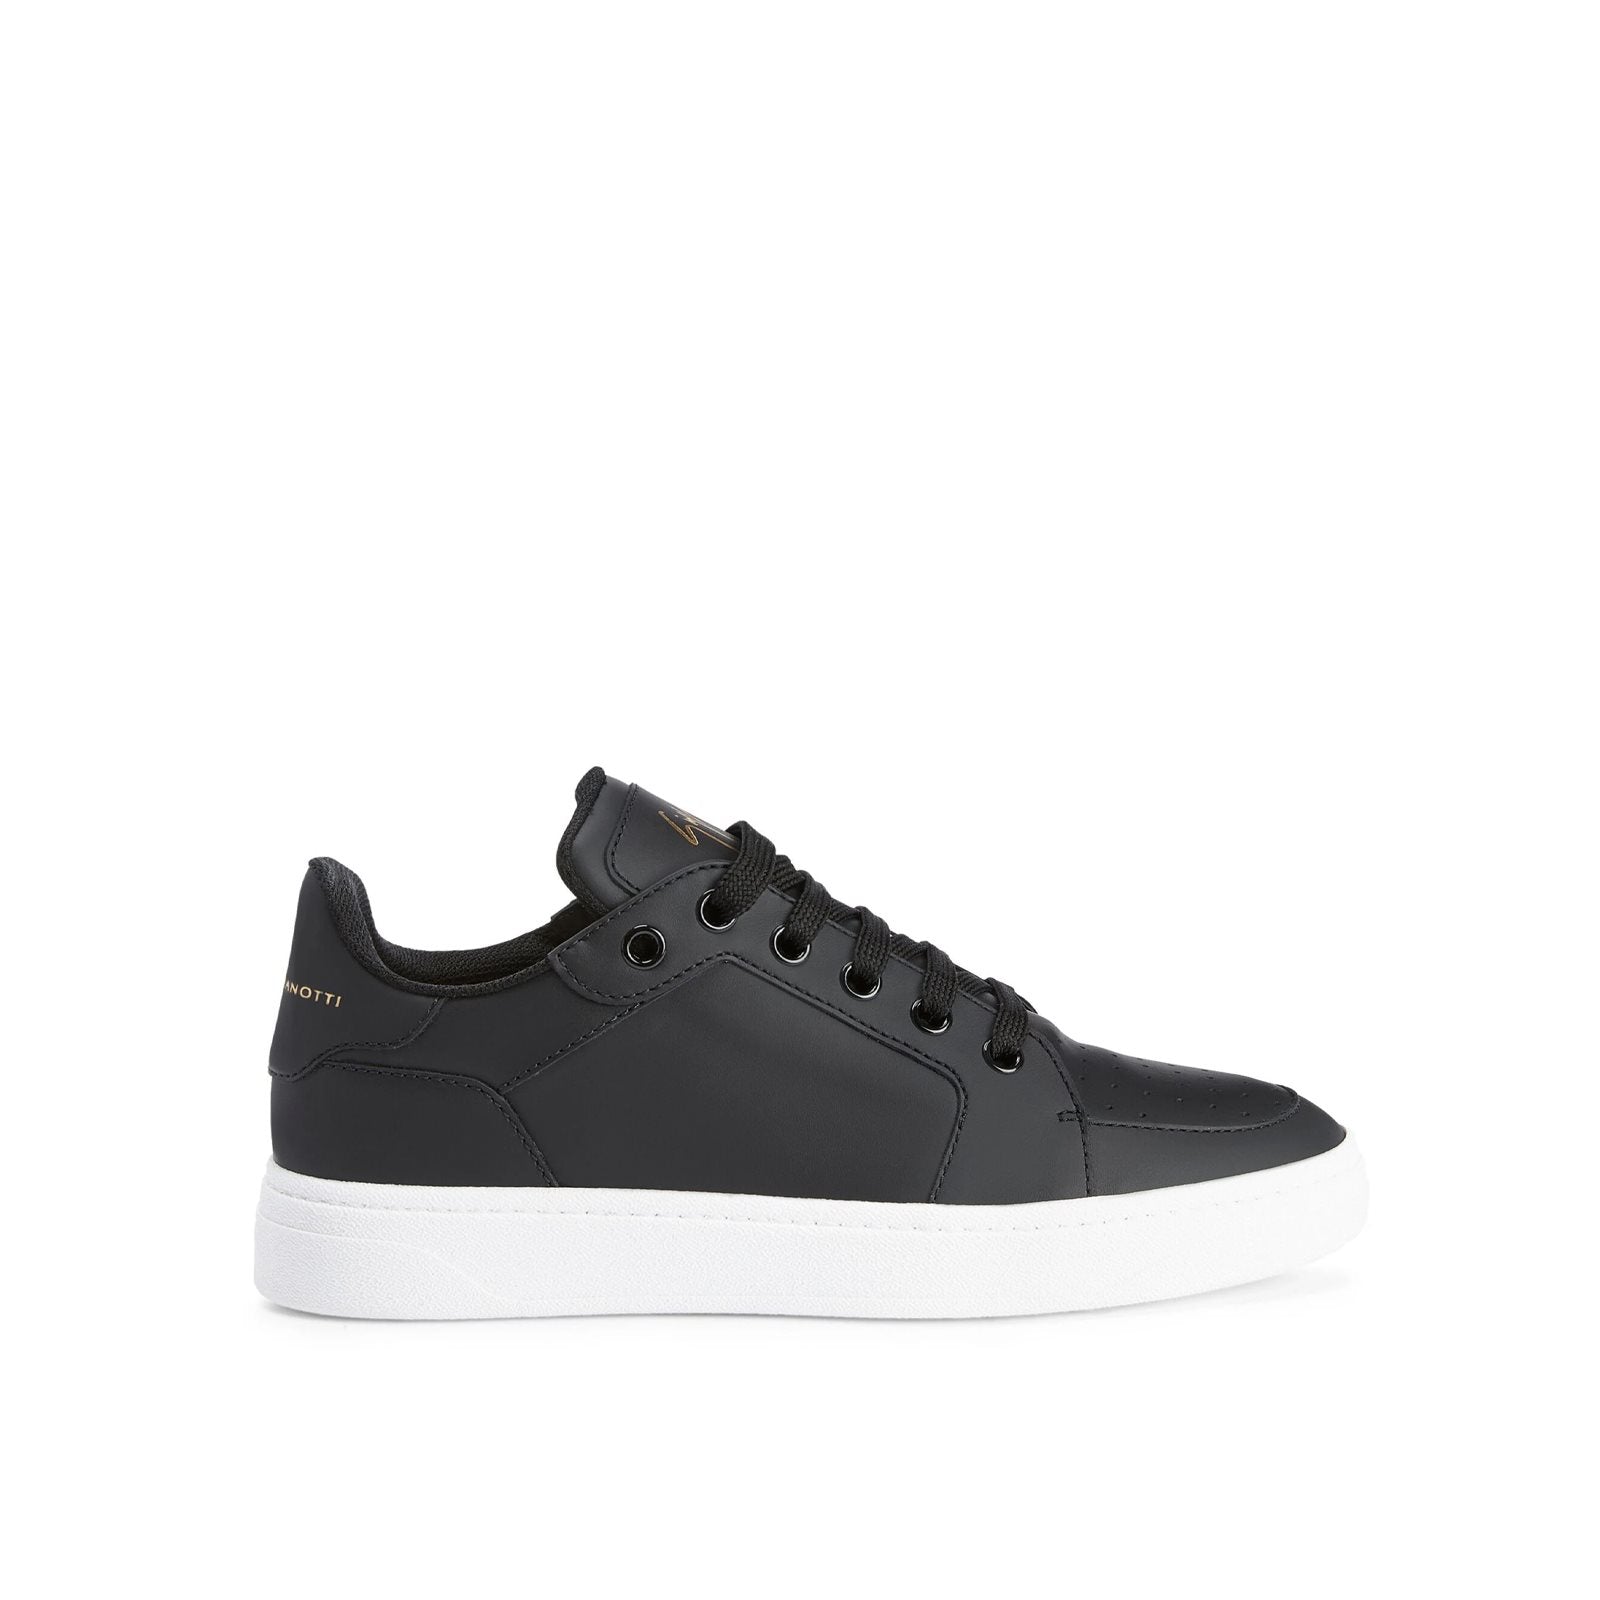 Bacatura power sneakers